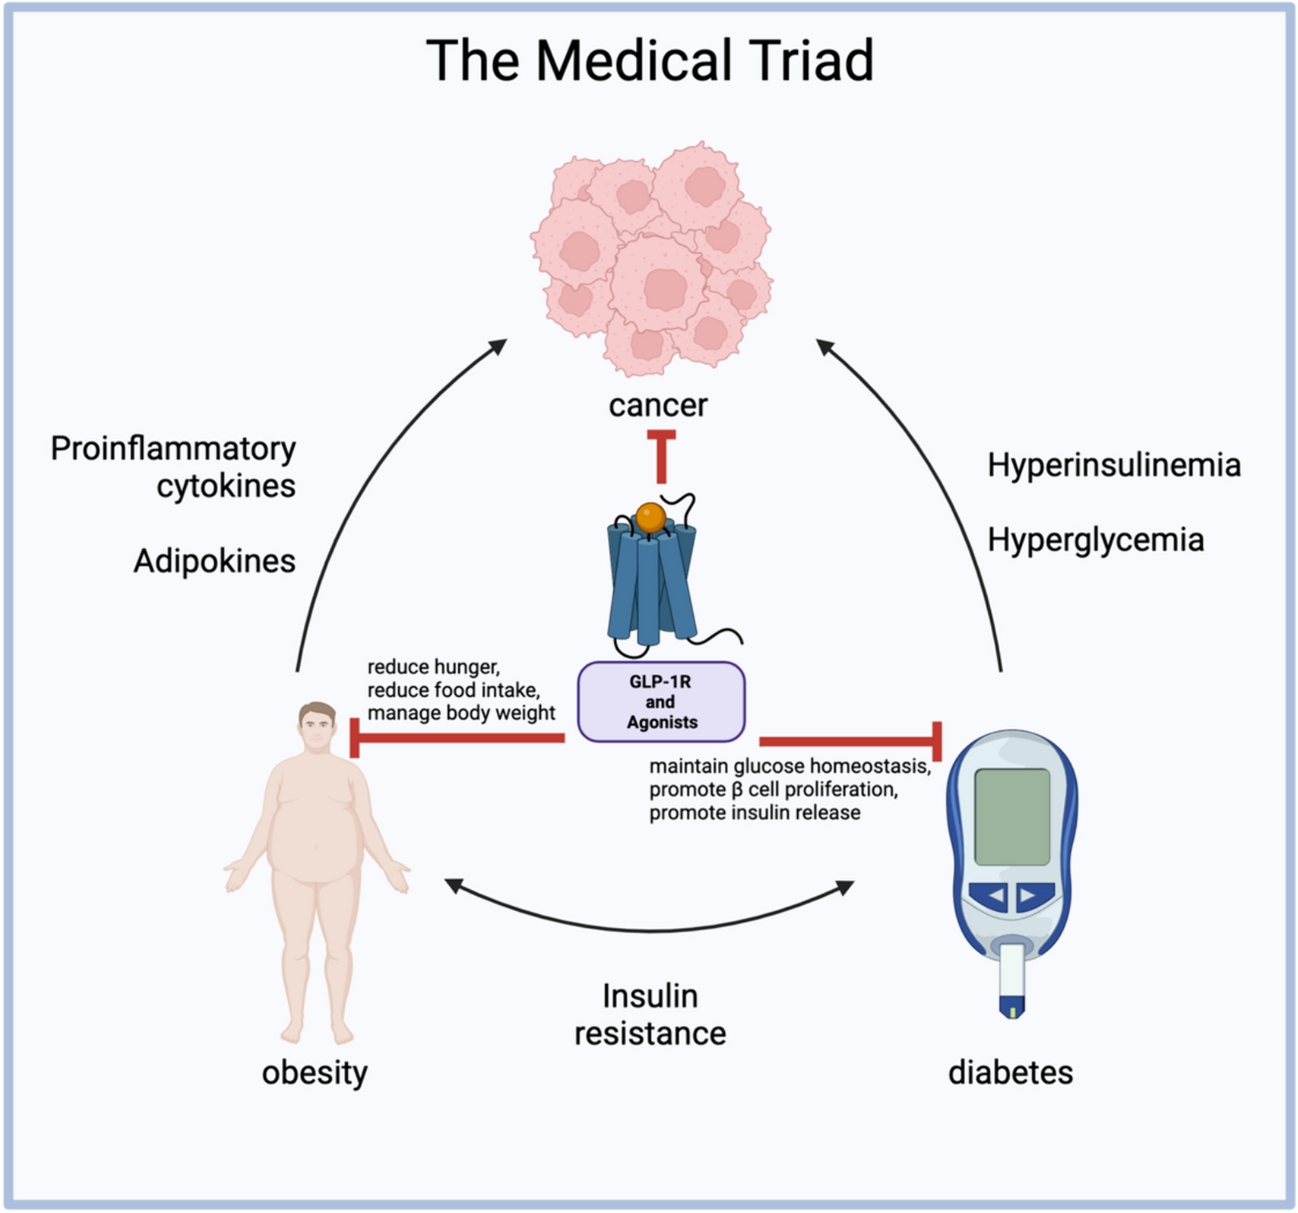 The effect of GLP-1R agonists on the medical triad of obesity, diabetes, and cancer